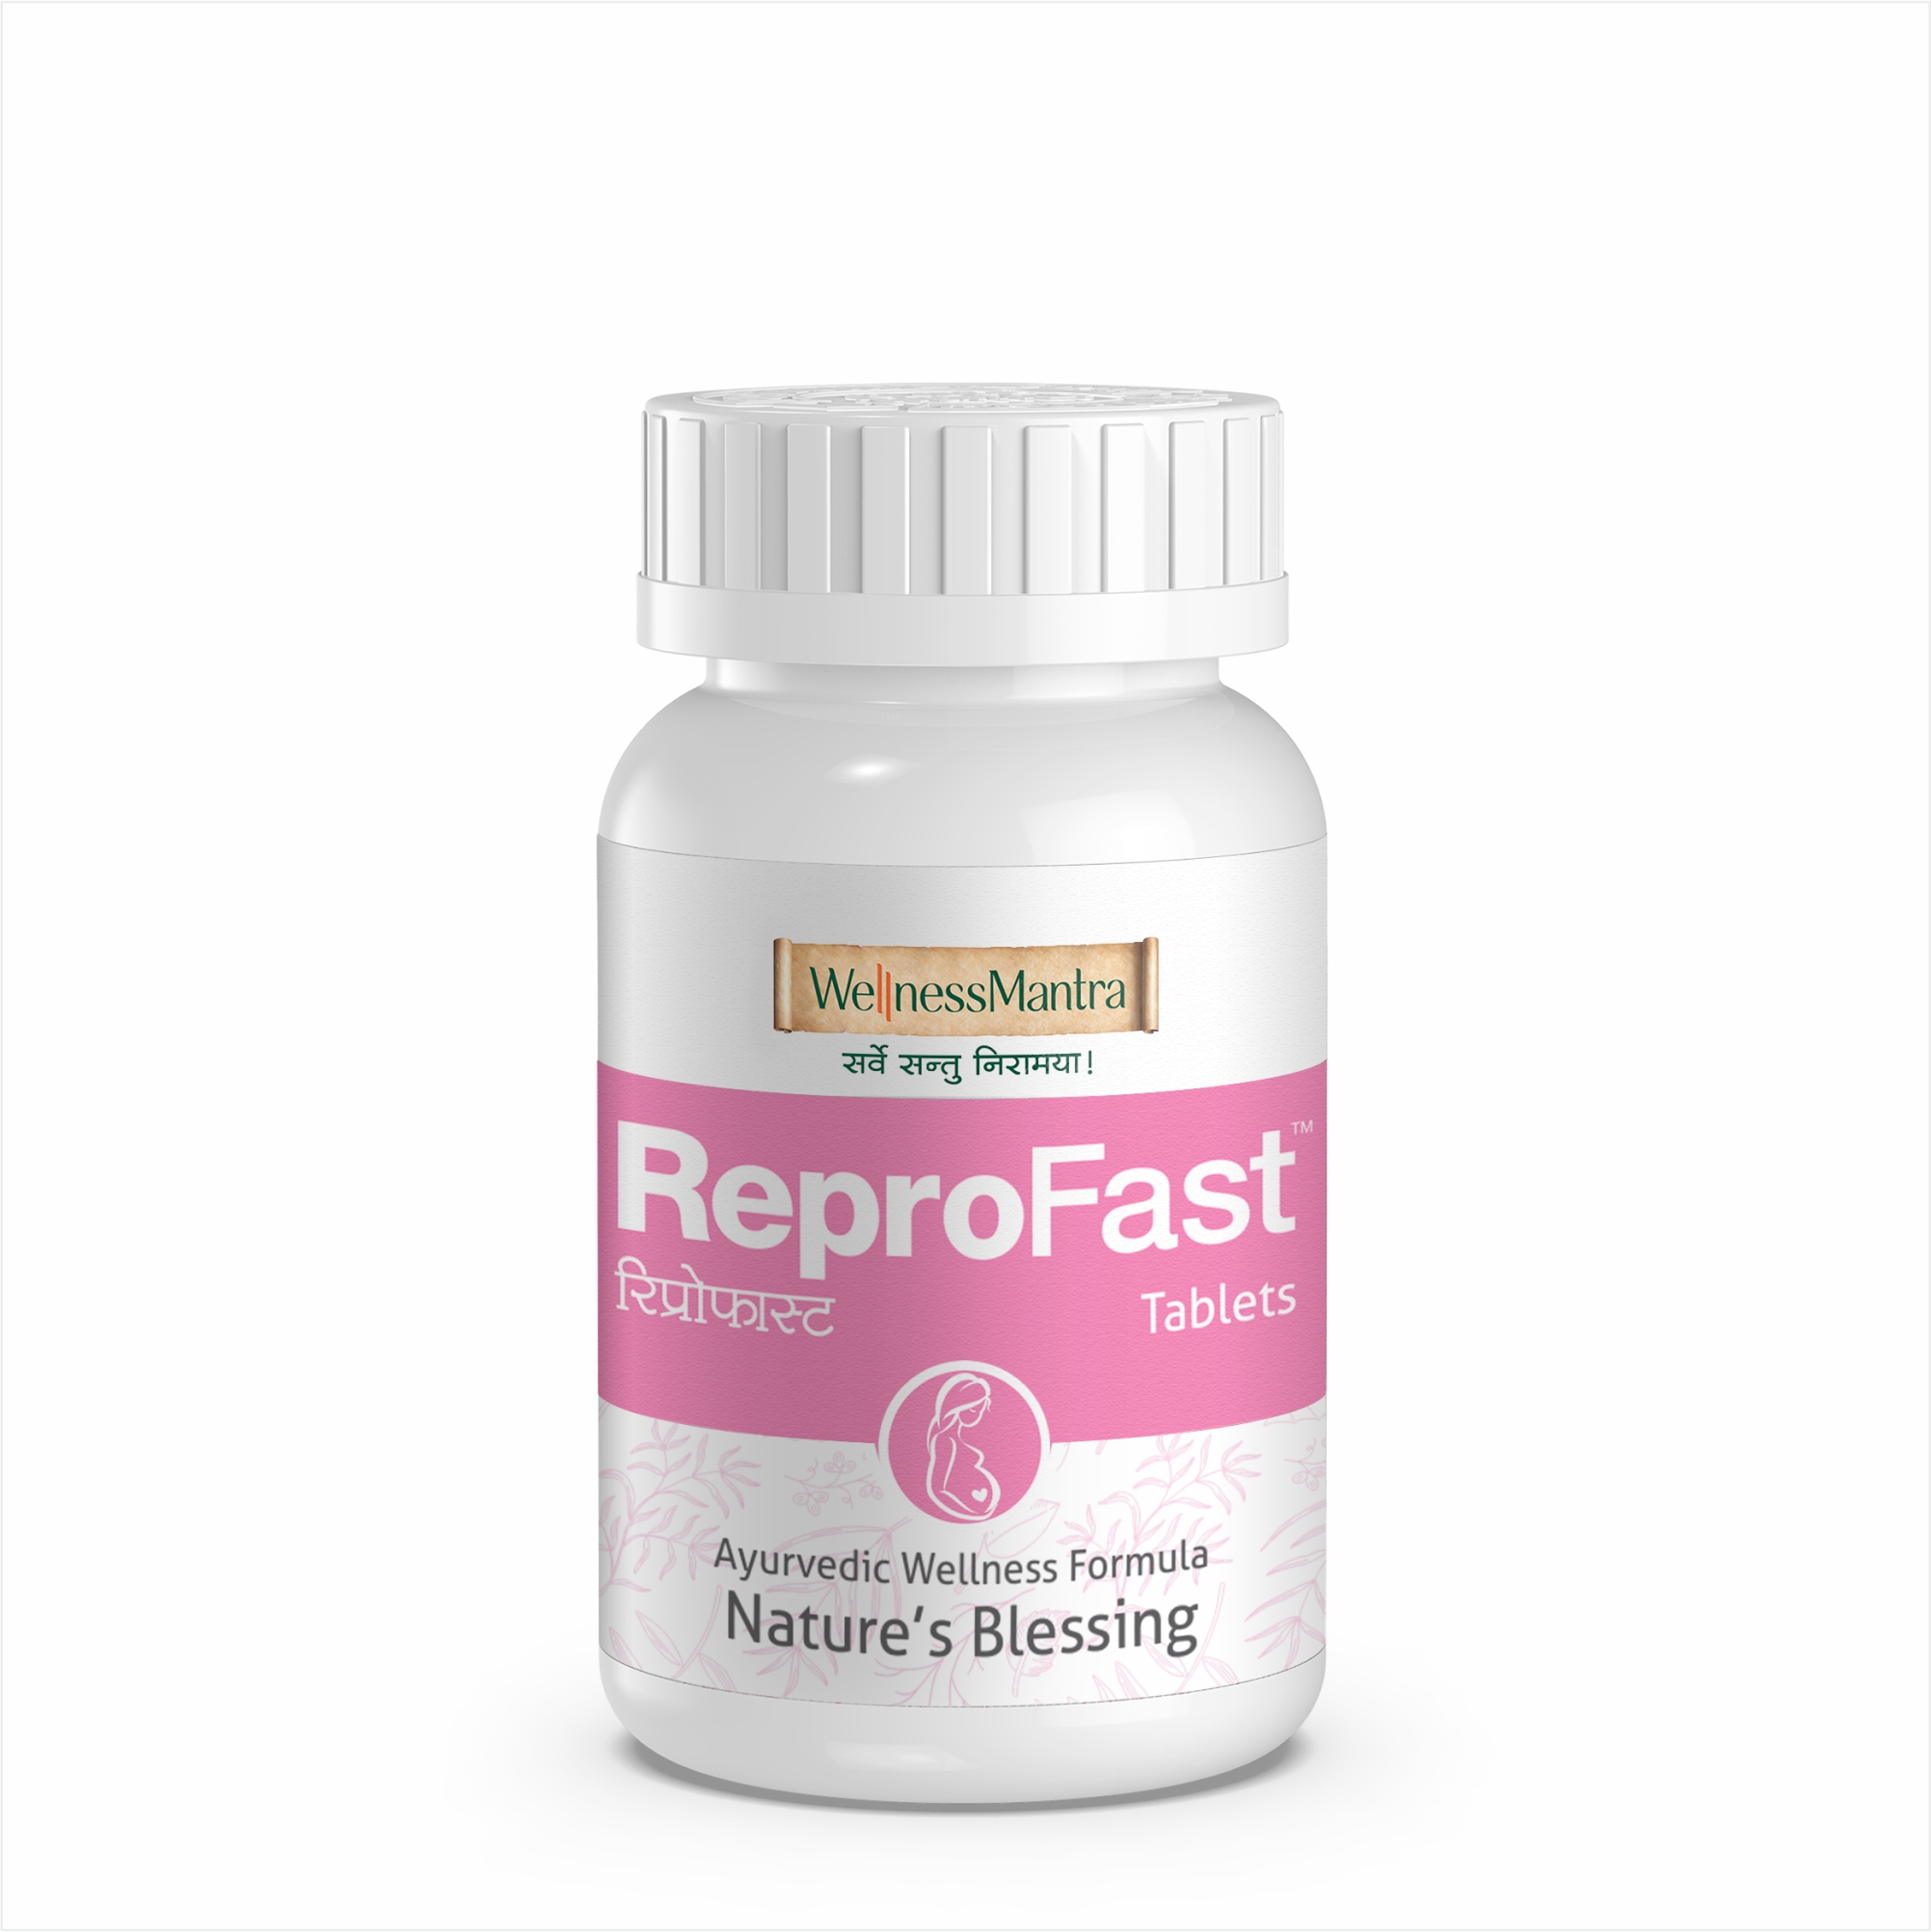 Buy Wellness Mantra ReproFast Tablets at Best Price Online